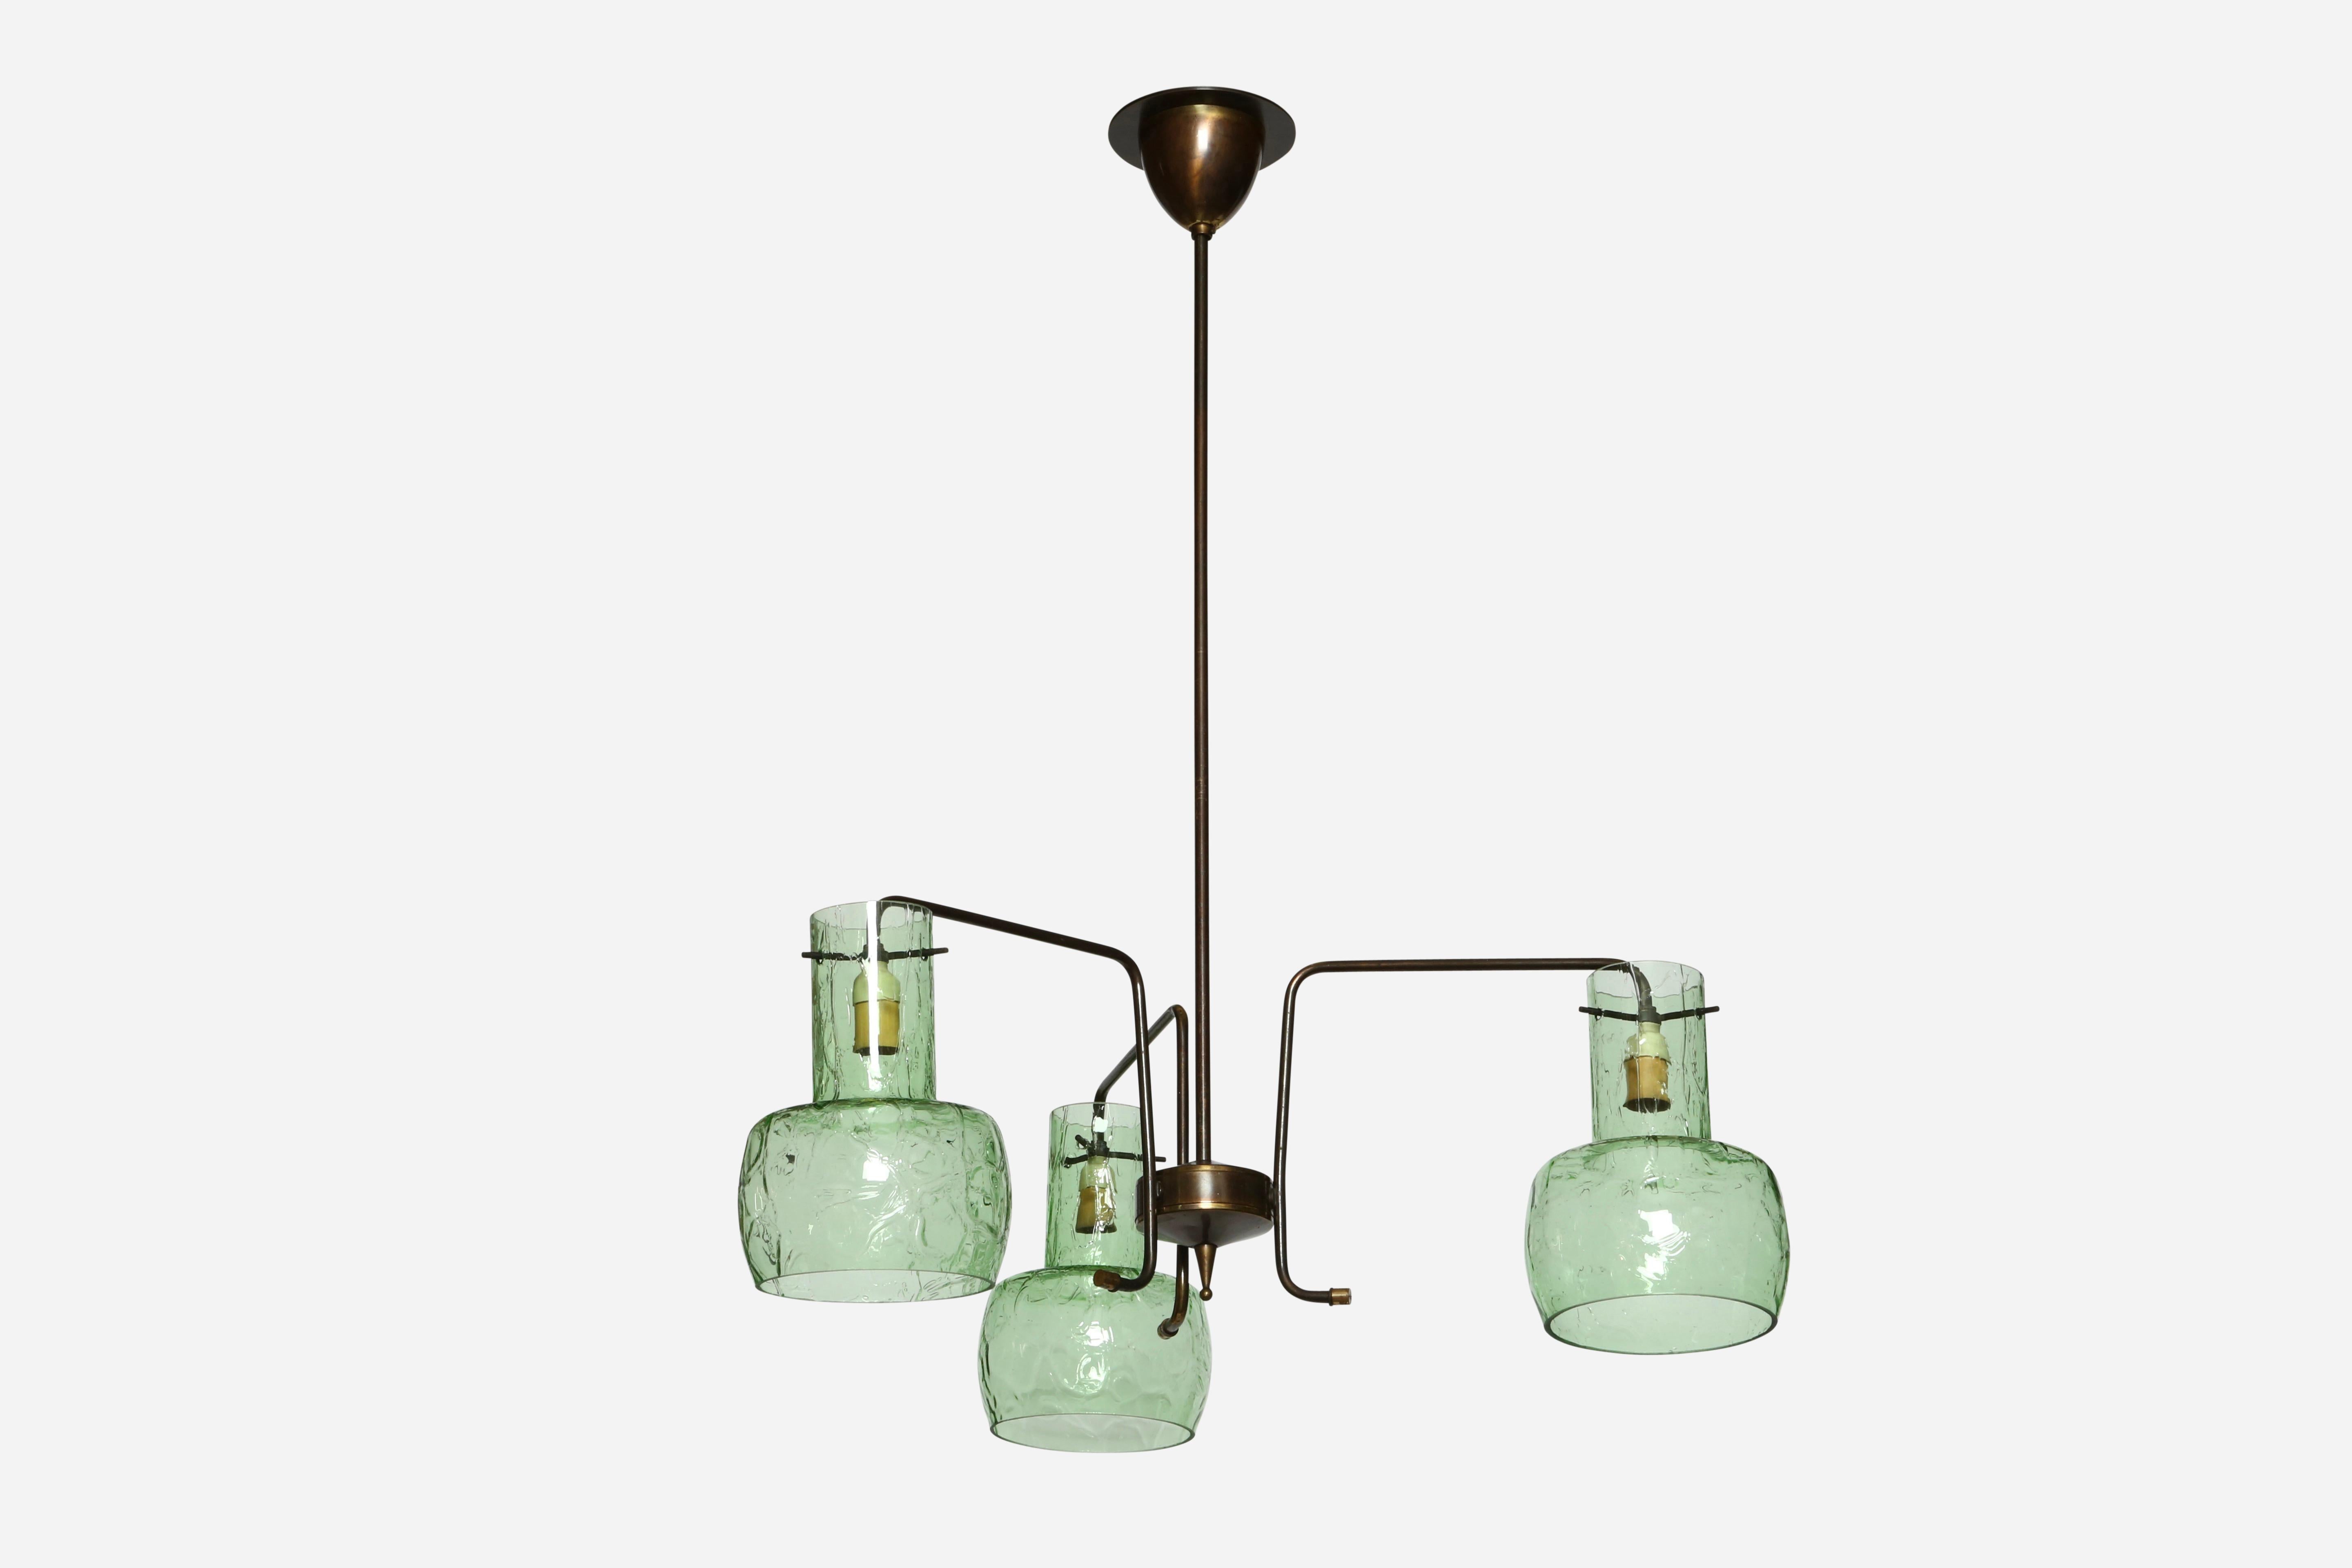 Murano glass suspension light.
Designed and made in Italy, 1960s
Handblown glass, patinated brass.
Three candelabra sockets.
Complimentary US rewiring upon request.
Height is adjustable.
Body is 9.5 inches.

At Illustris Lighting our main focus is